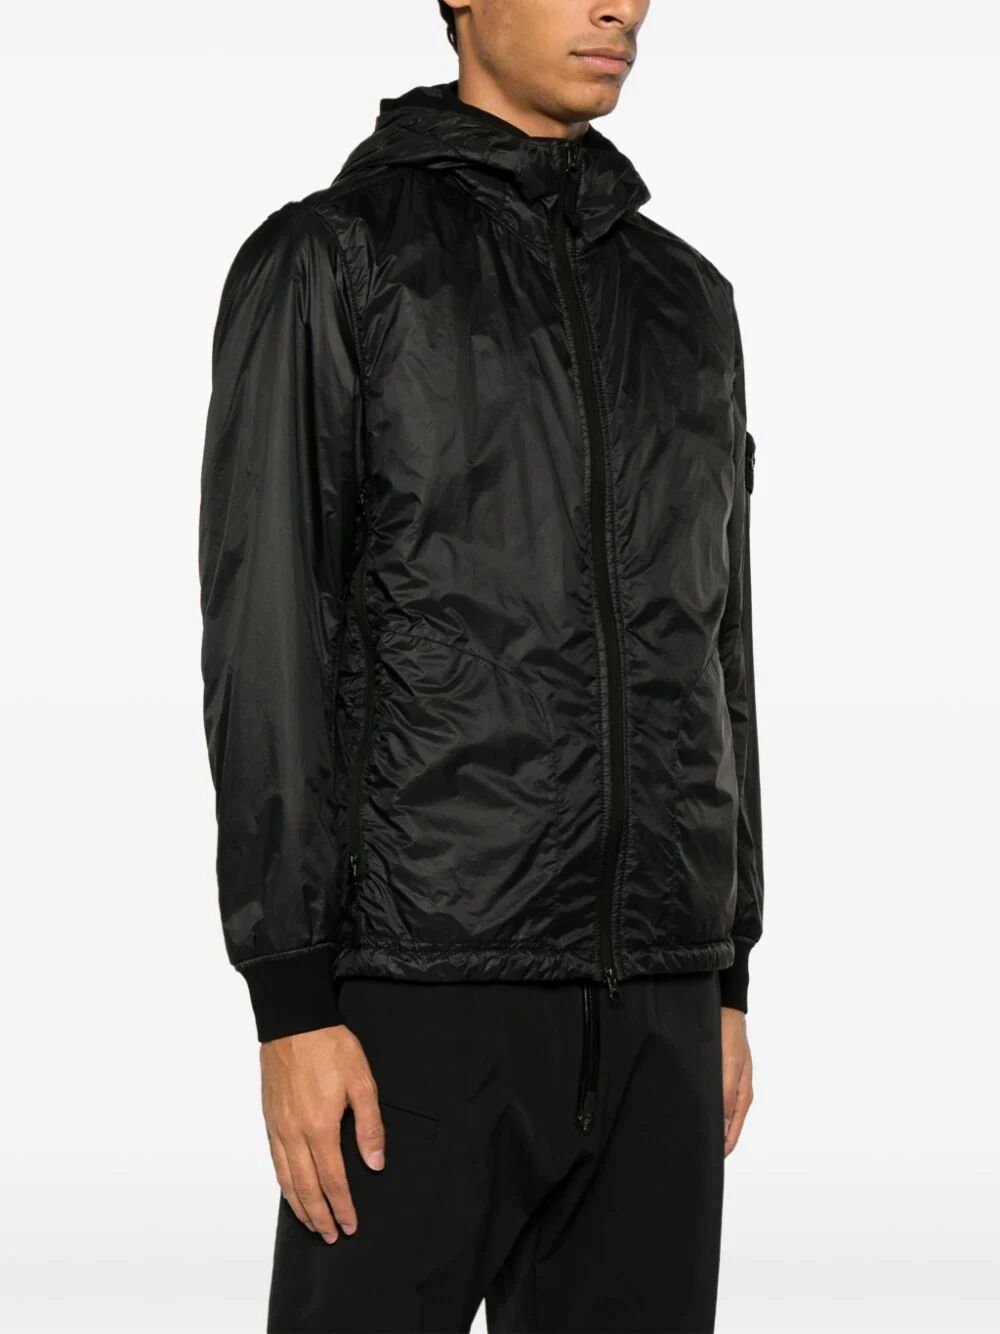 STONE ISLAND-LIGHT OUTERWEAR PACKABLE-7915Q0325 V0029